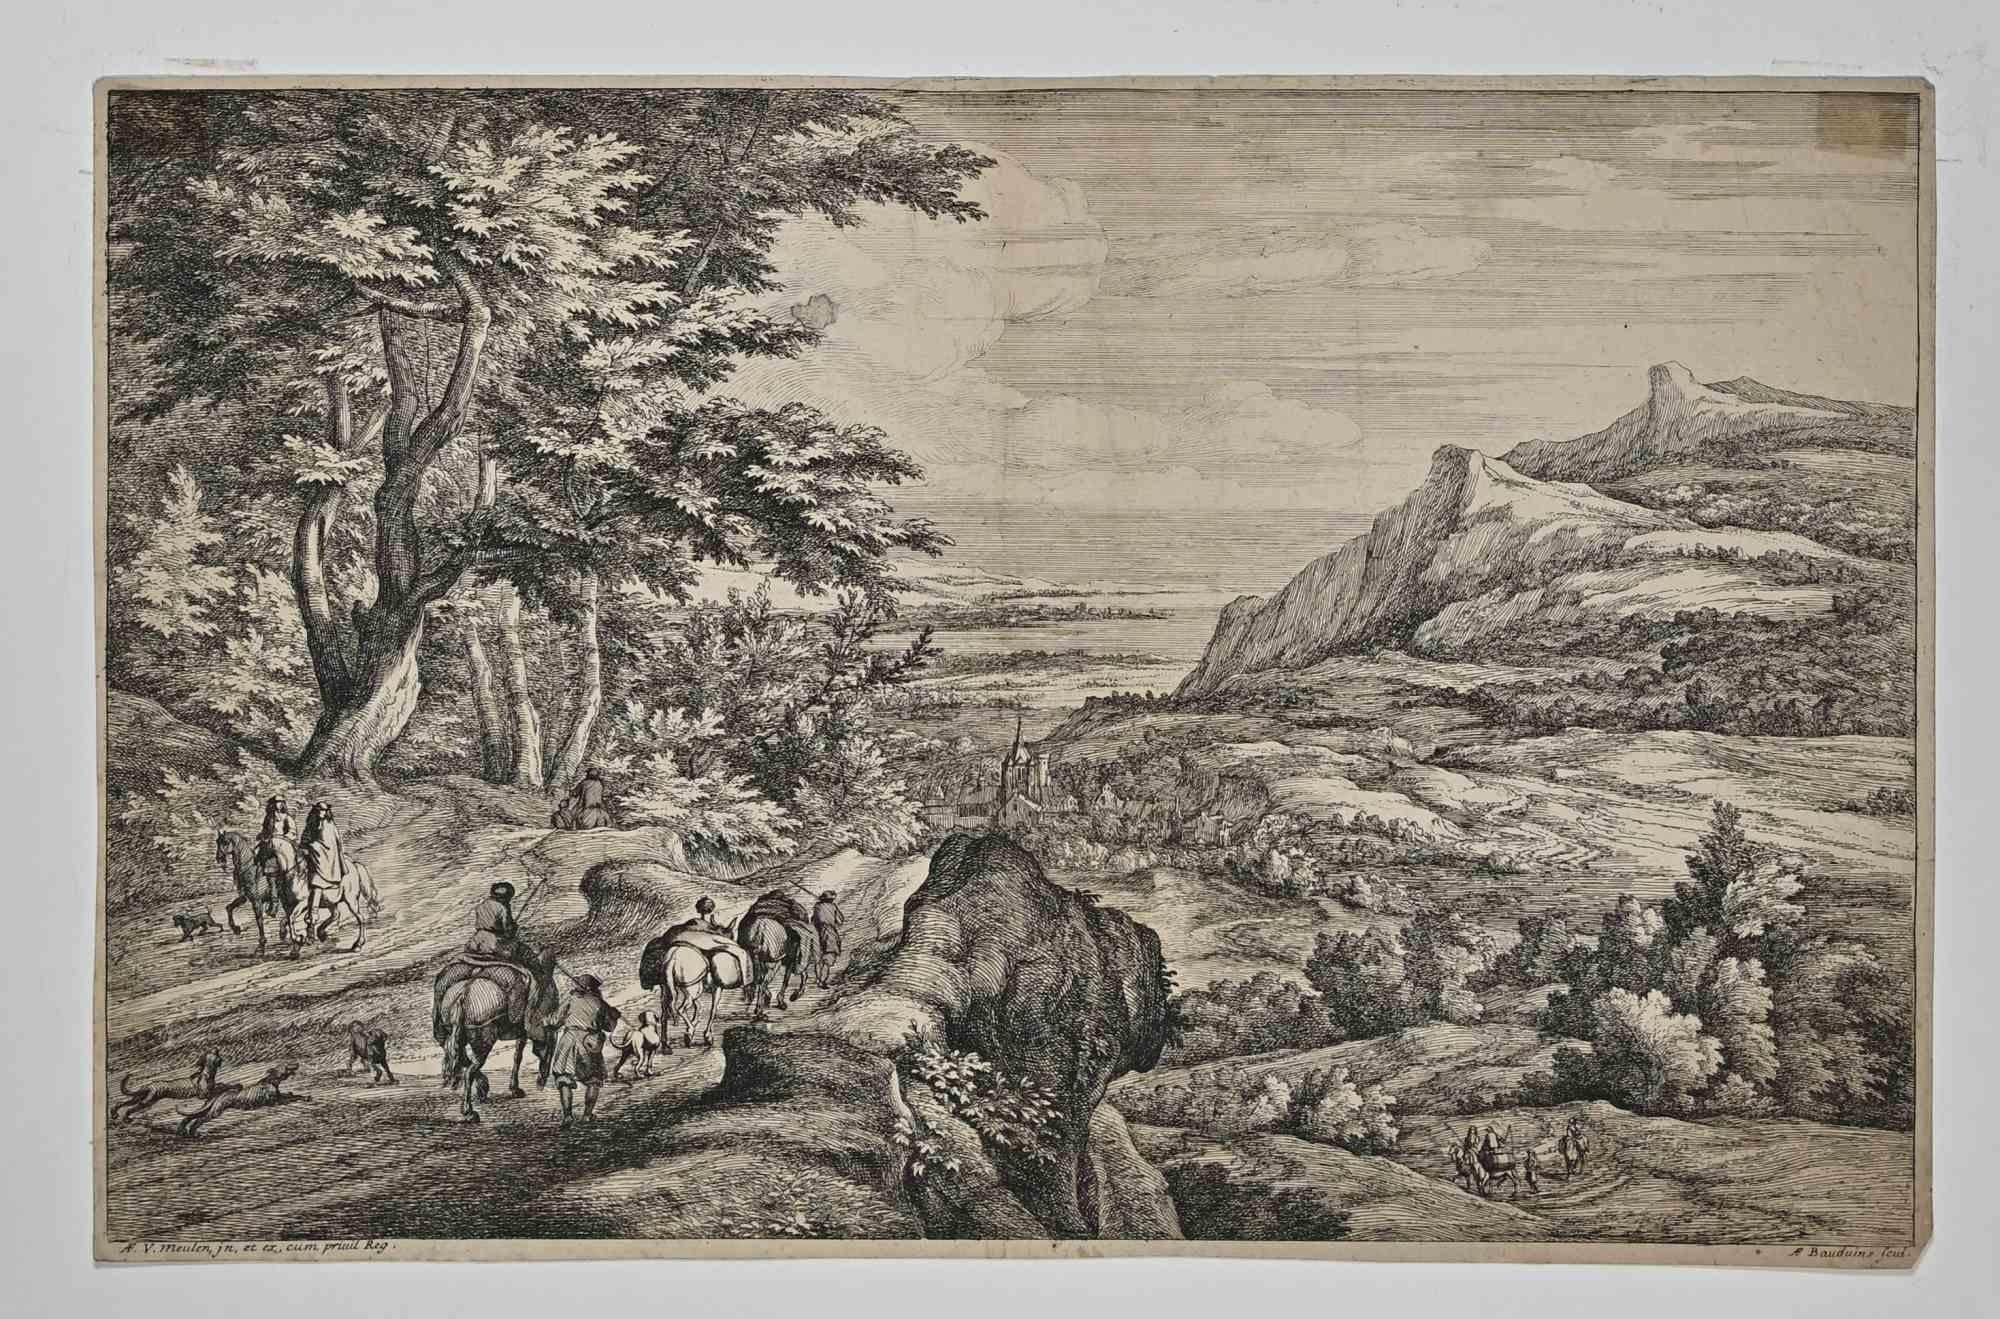 Le couvent dans la vallée is an original etching realized in the 17th Century by Antoine-François Bauduins (1640 1700).

Trimmed, very good conditions.

Signed on the plate.

The artwork is depicted through soft strokes in a well-balanced